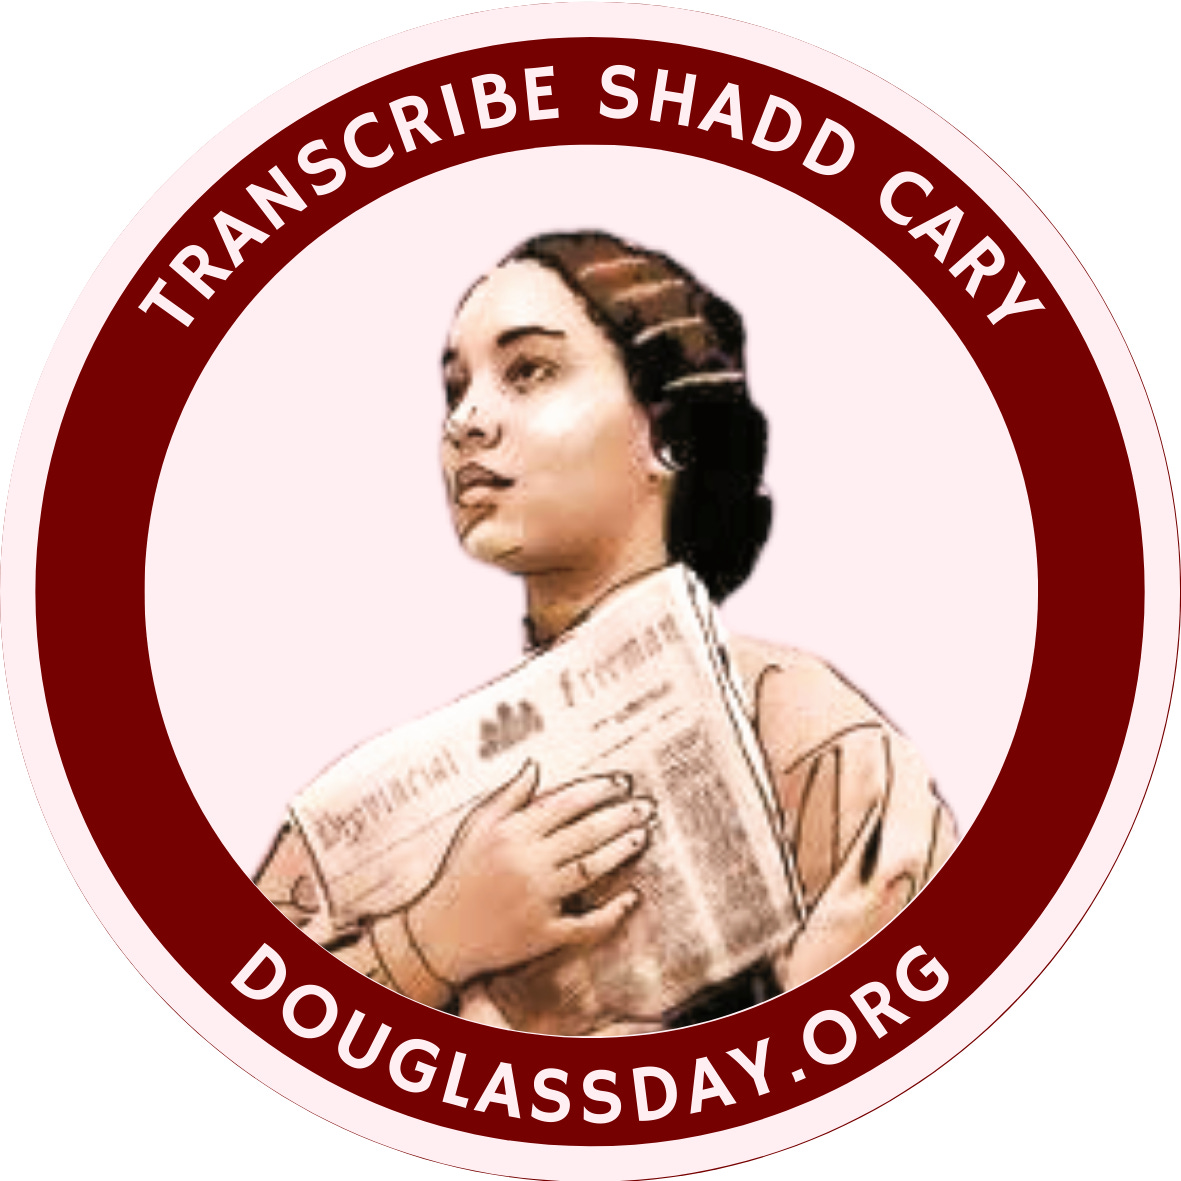 Sticker with "Transcribe Shadd Cary" and "DouglassDay.Org" with an illustrated image of Mary Ann Shadd Cary. 